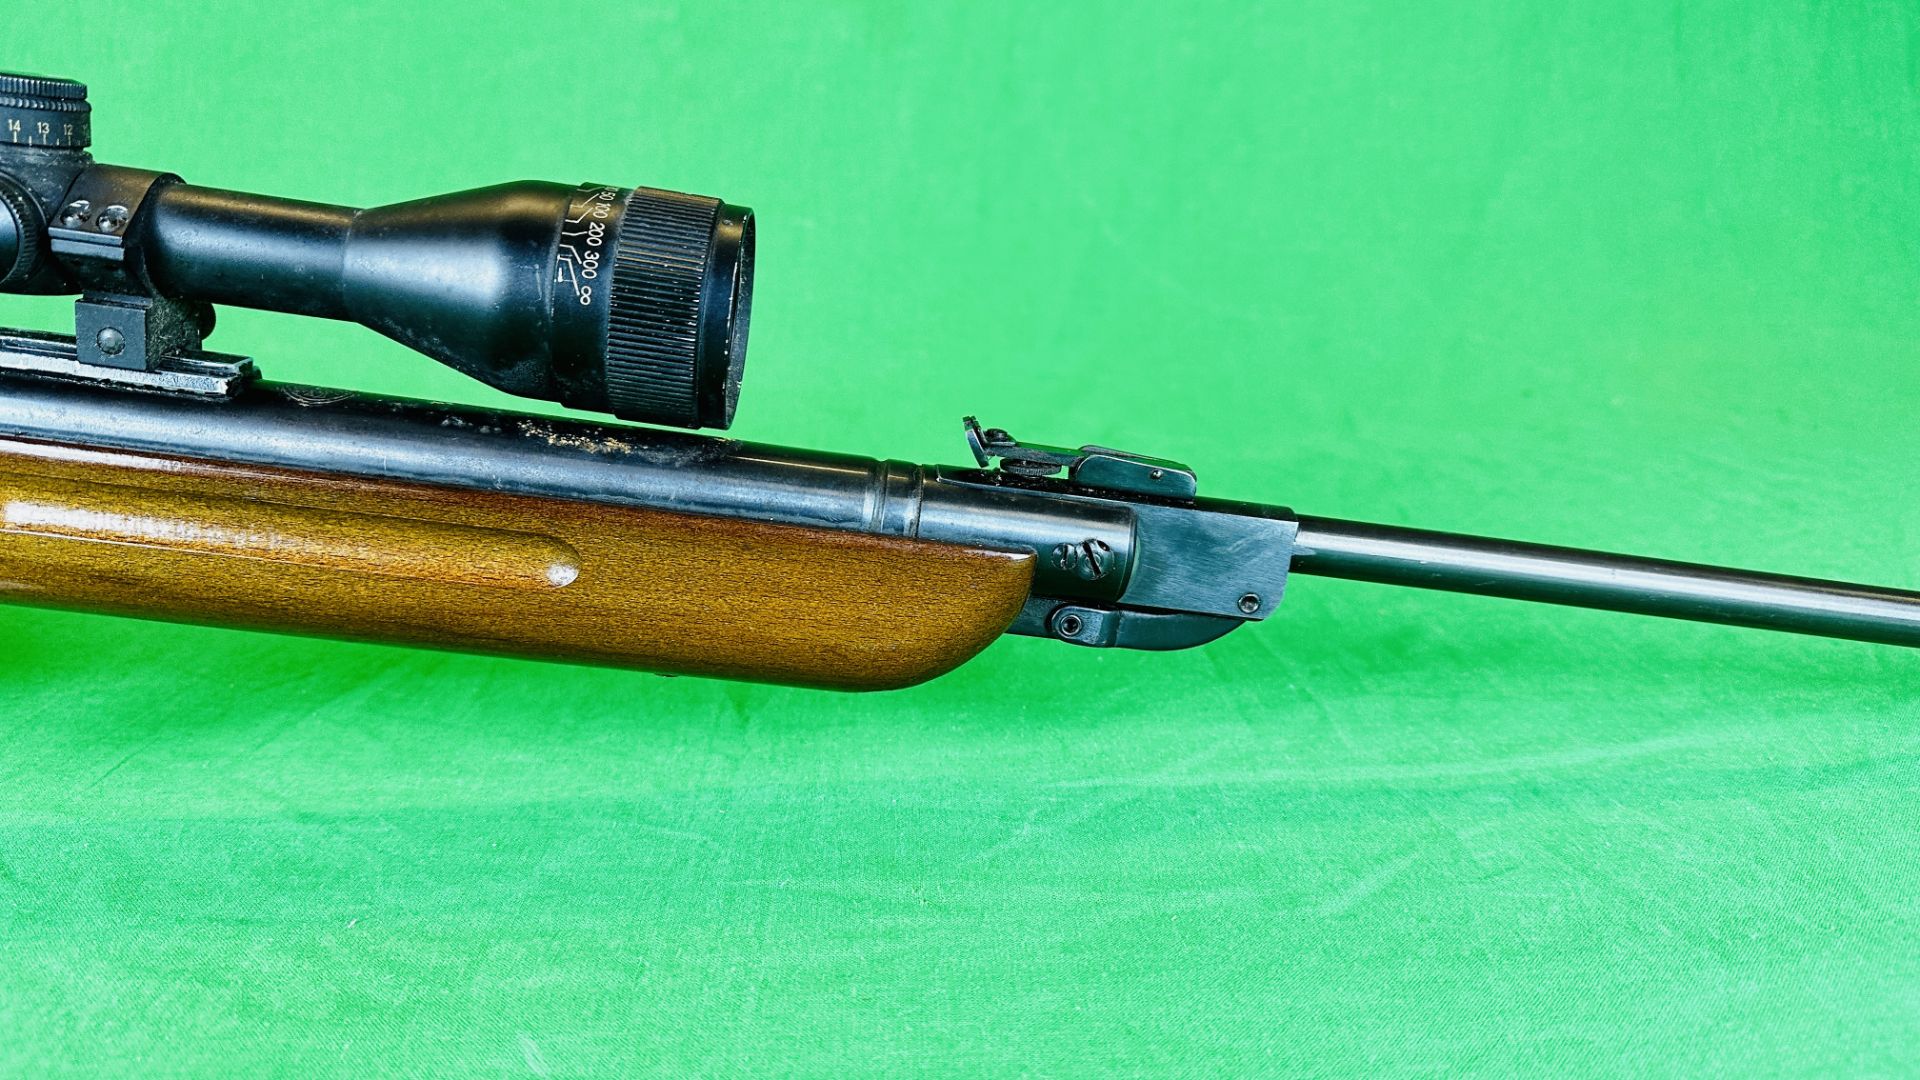 BSF MODEL S60 .22 CALIBRE BREAK BARREL AIR RIFLE FITTED WITH A.S.I. - Image 4 of 12